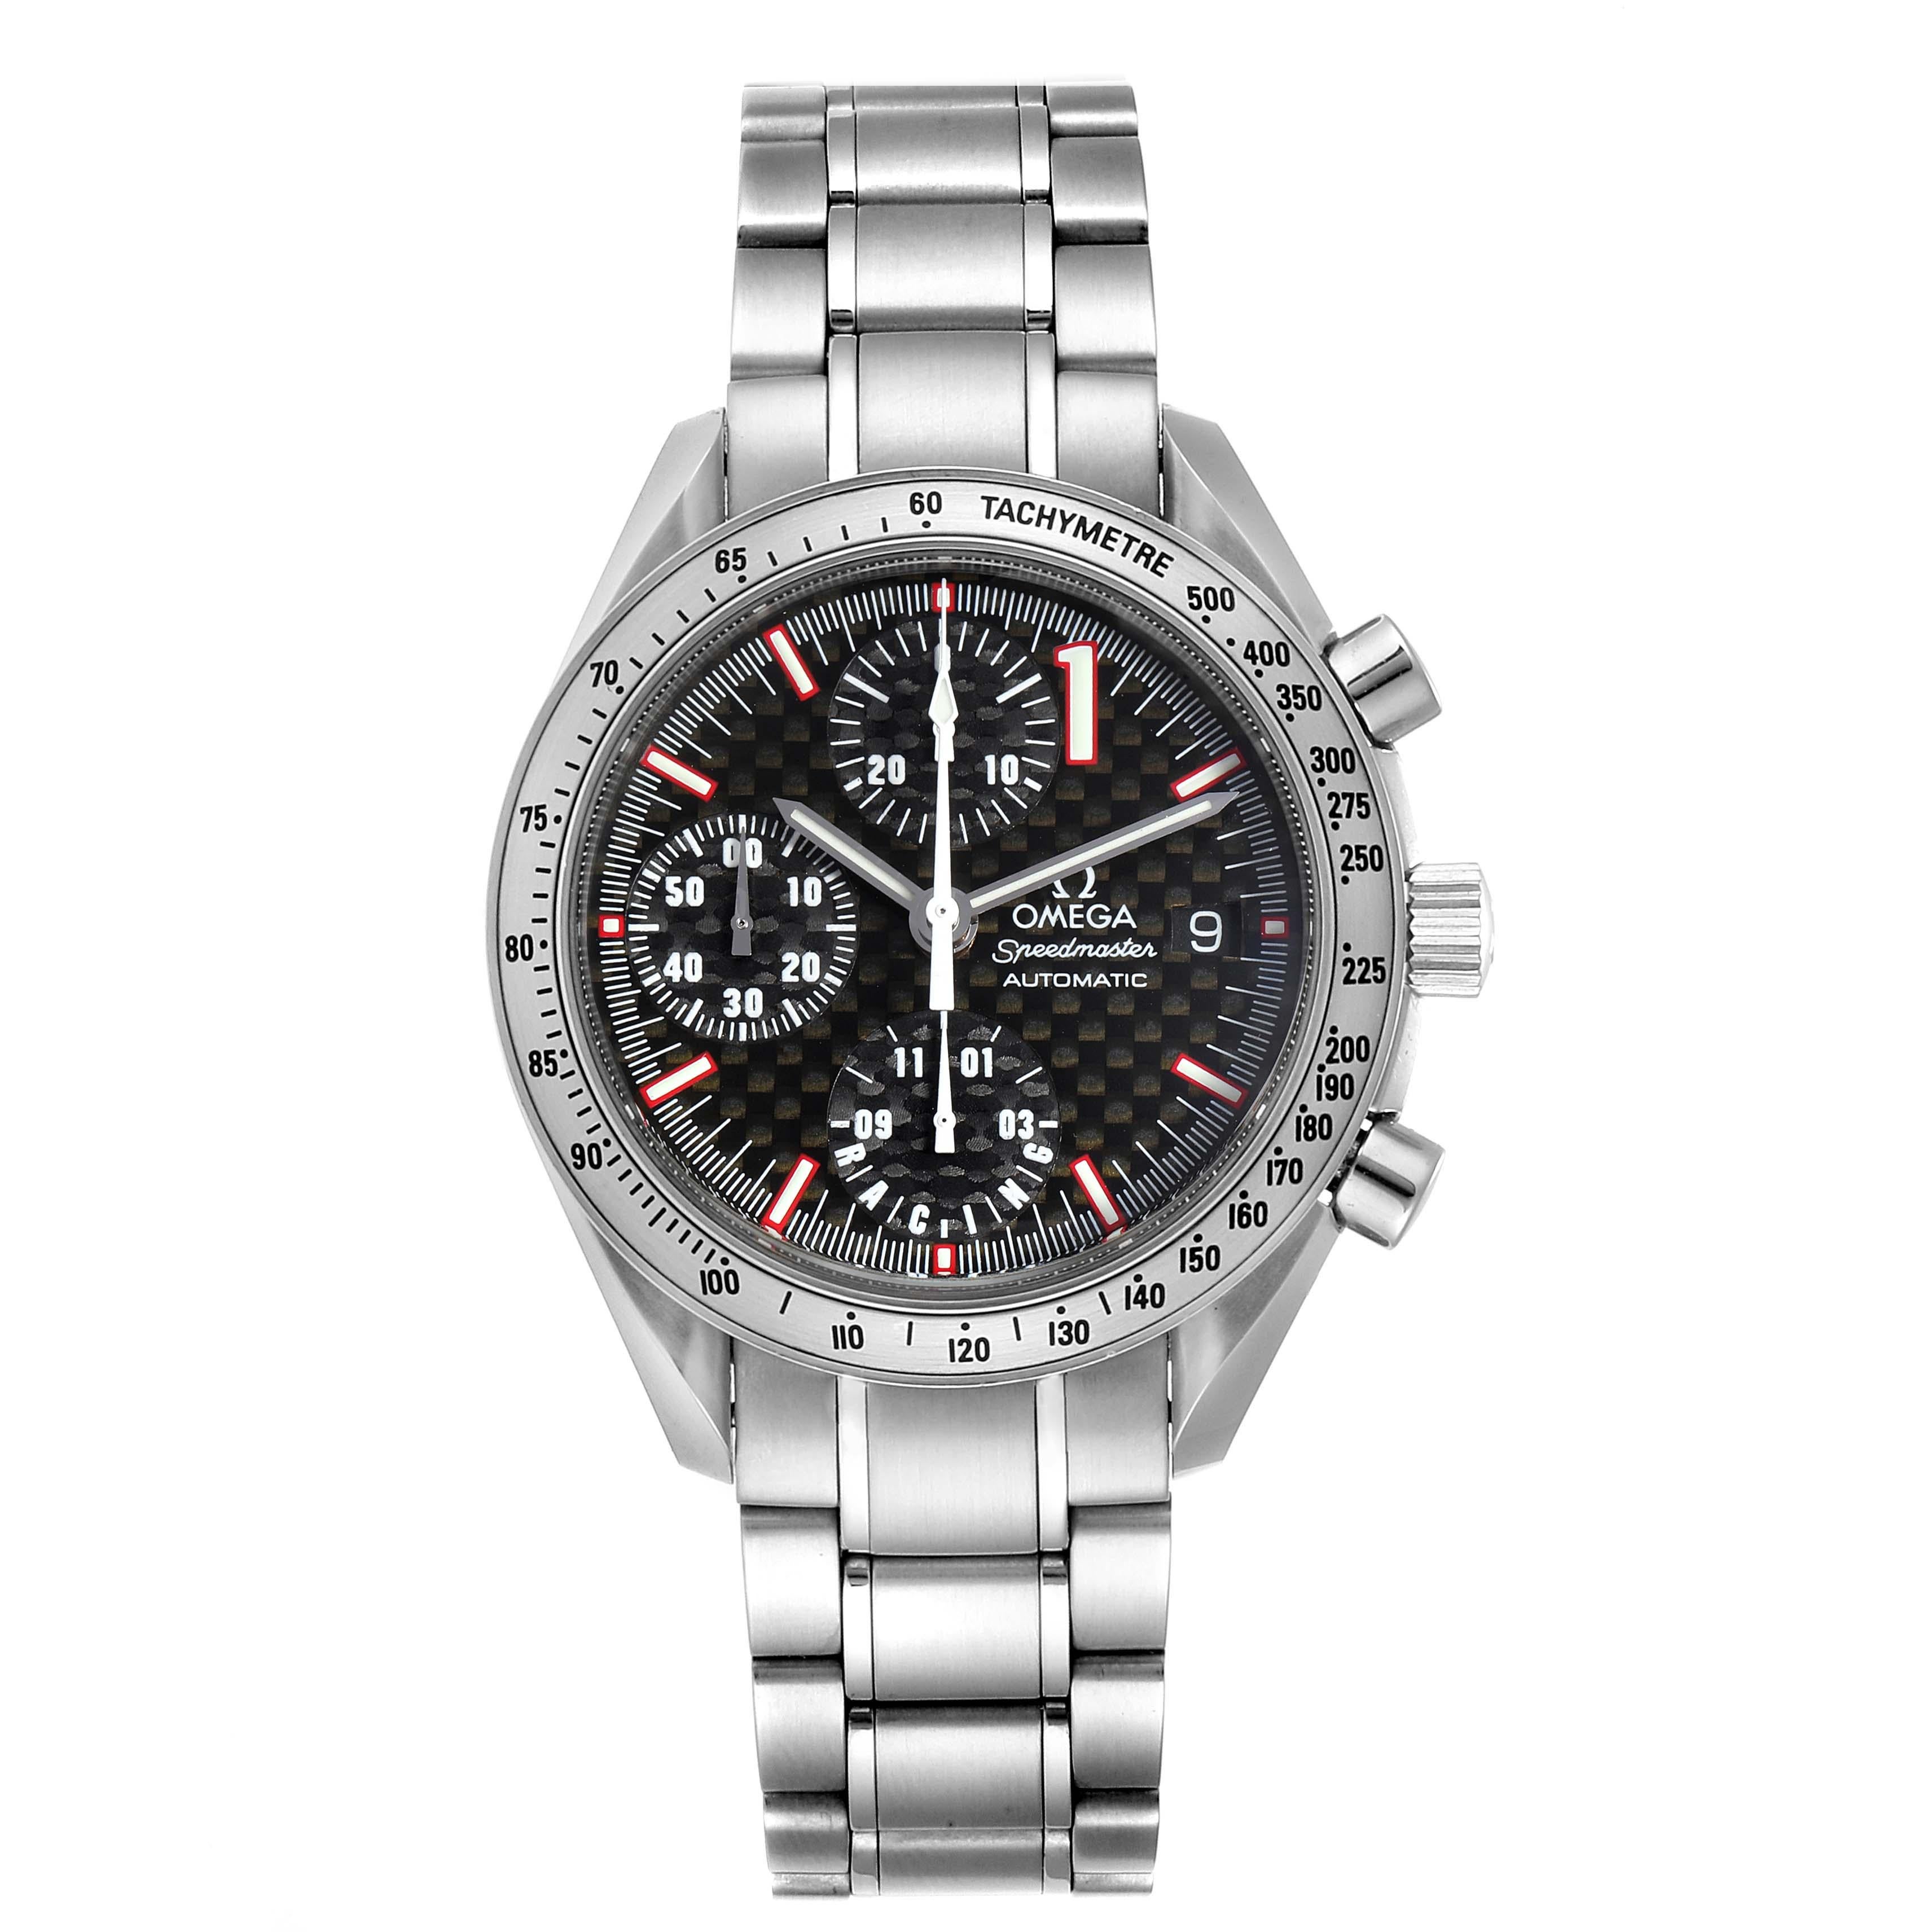 Omega Speedmaster Schumacher Racing Limited Edition Watch 3519.50.00. Automatic self-winding chronograph movement. Stainless steel round case 39.0 mm in diameter. Caseback engraved with Michael Schumacher's signature and inscription 'World Champion